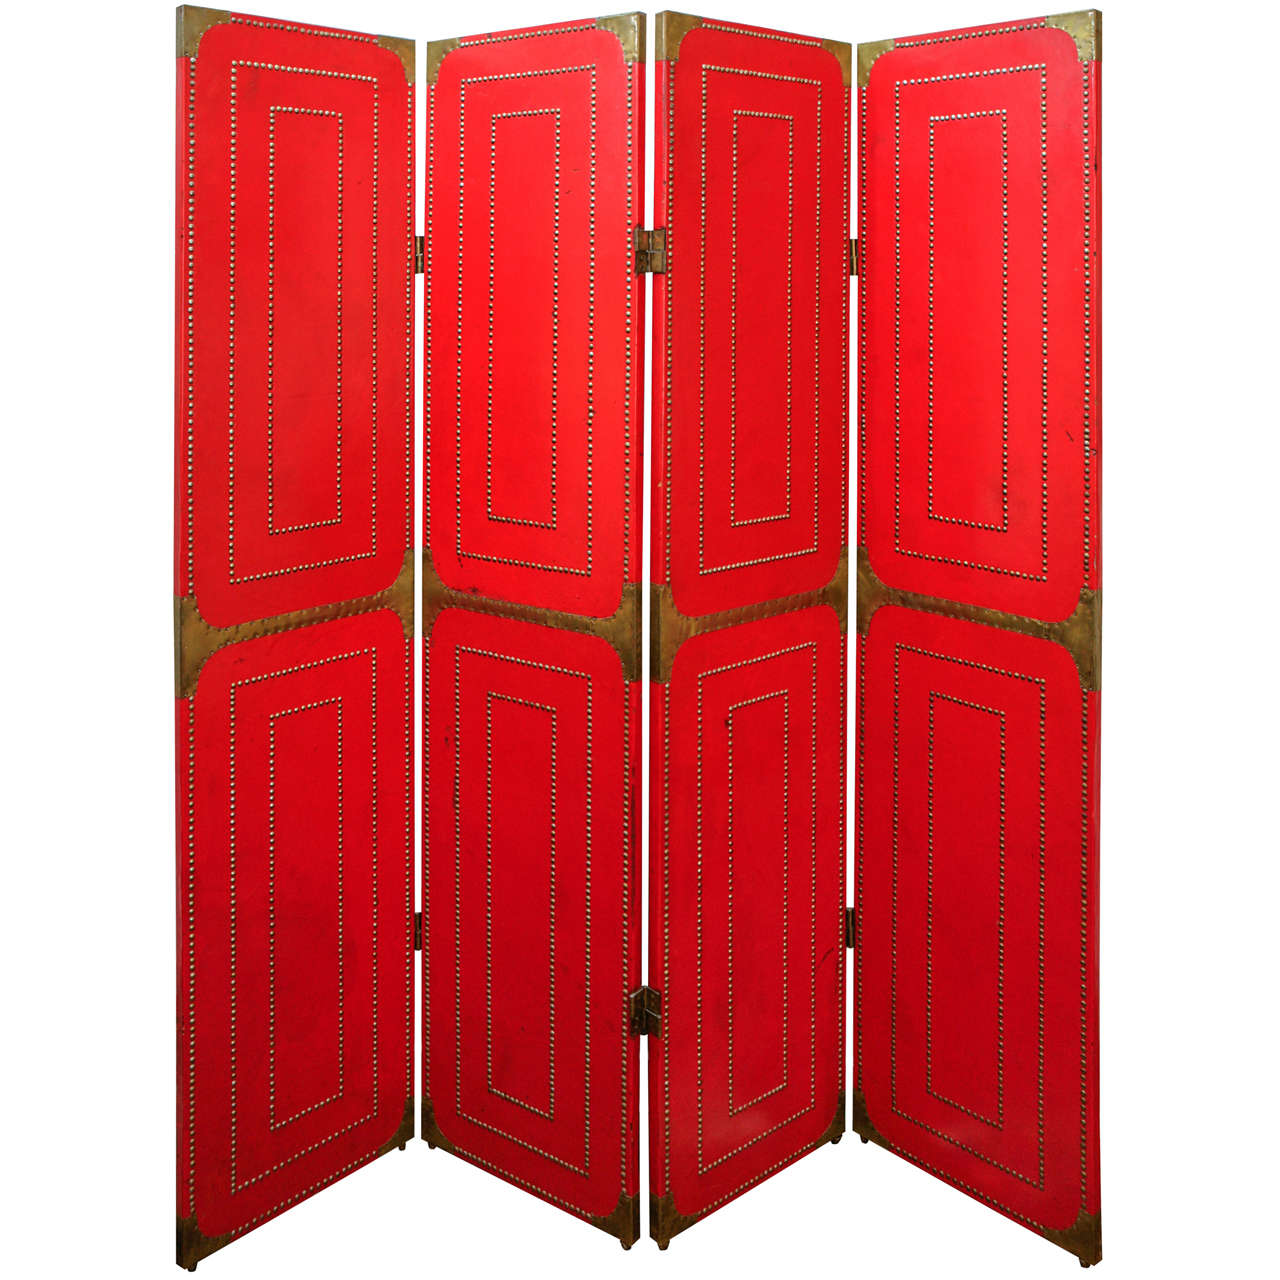 Four Panel Folding Screen in Red Leather and Brass Studs